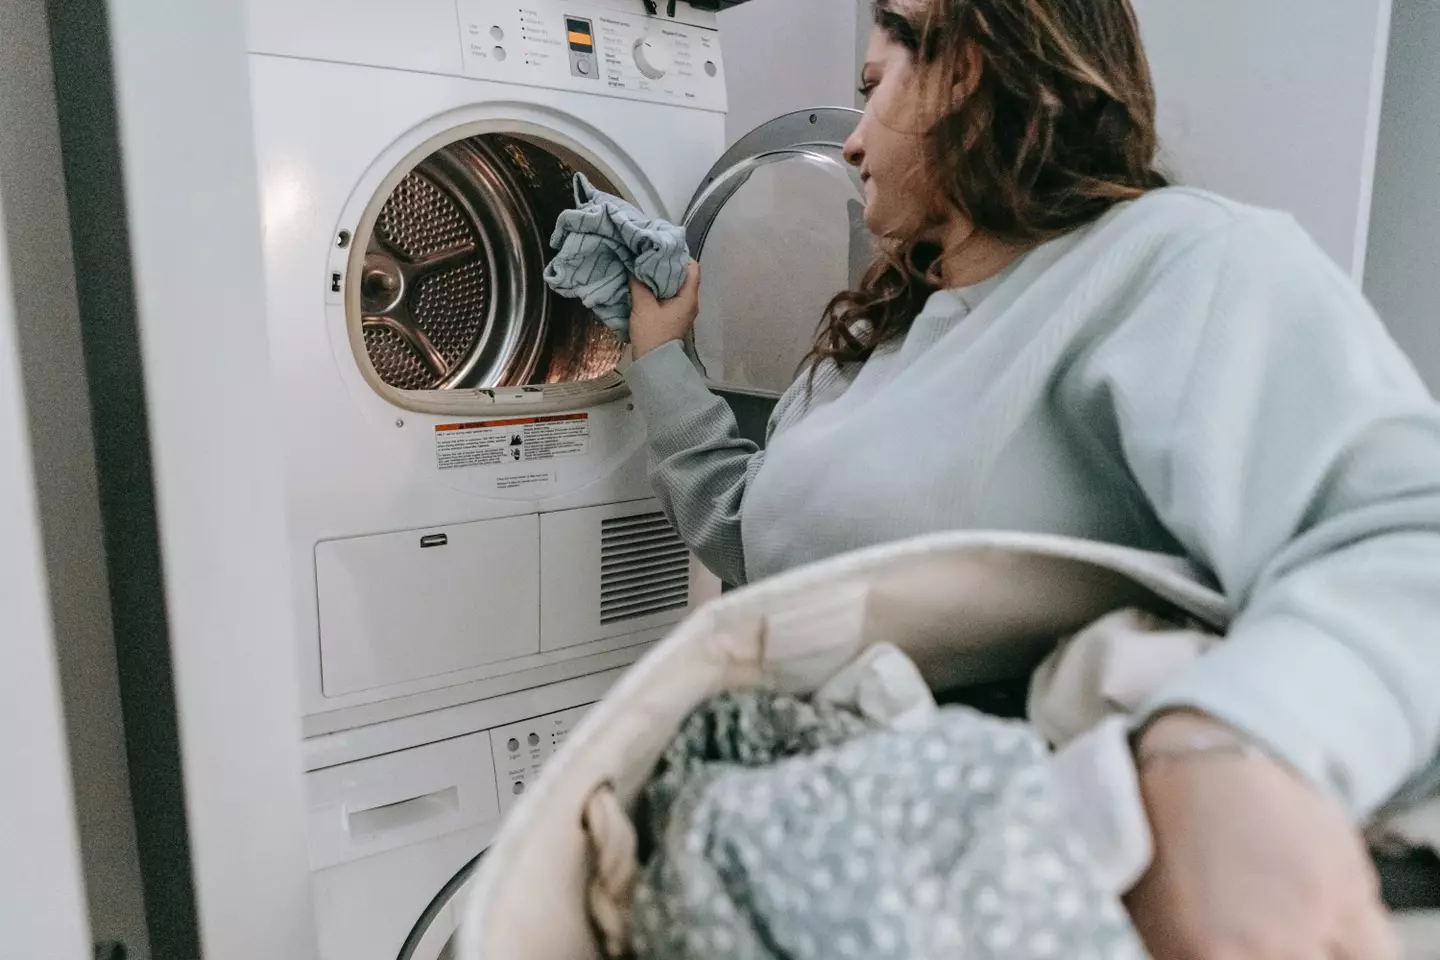 The genius laundry hack will save you time and money.